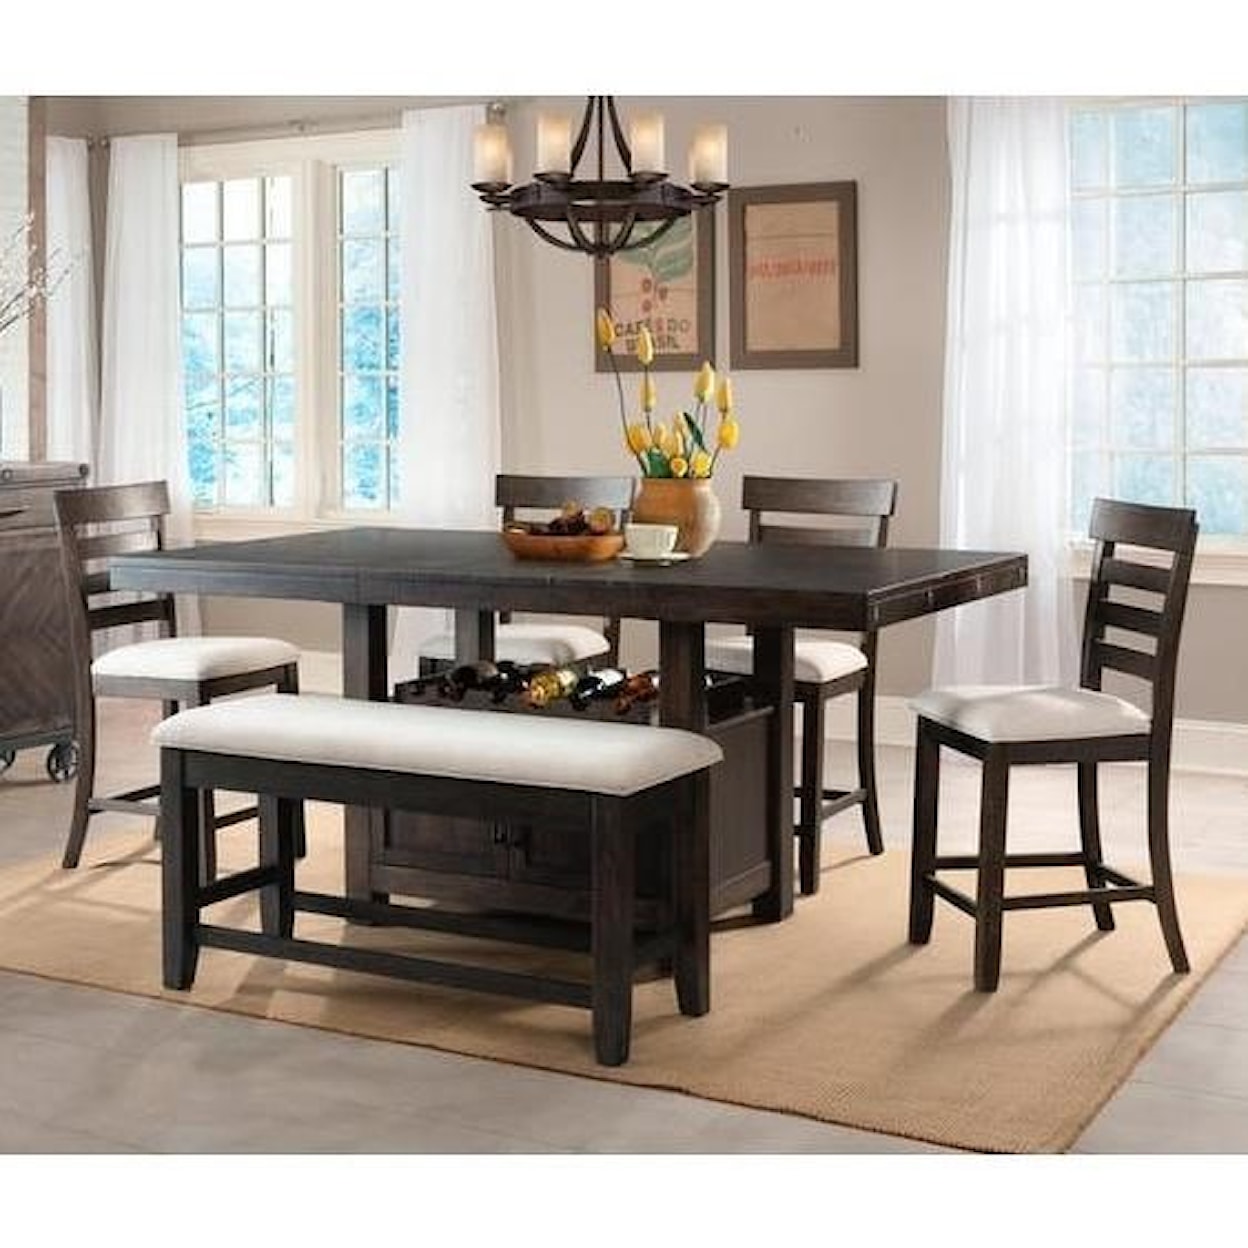 Elements International Colorado Counter Height Dining Set with Bench